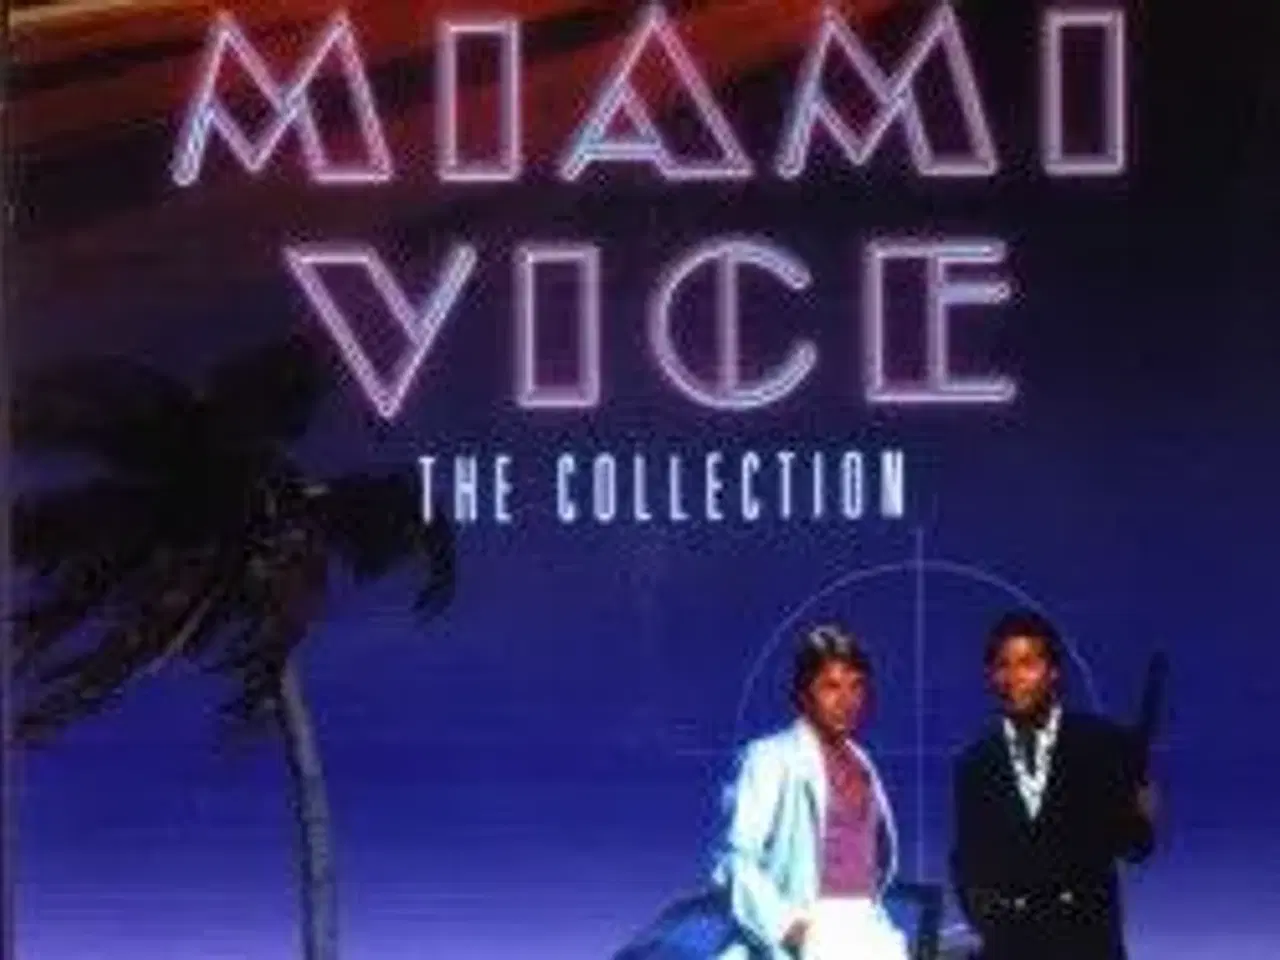 Billede 1 - Tv serie ; MIAMI VICE ; The Collection